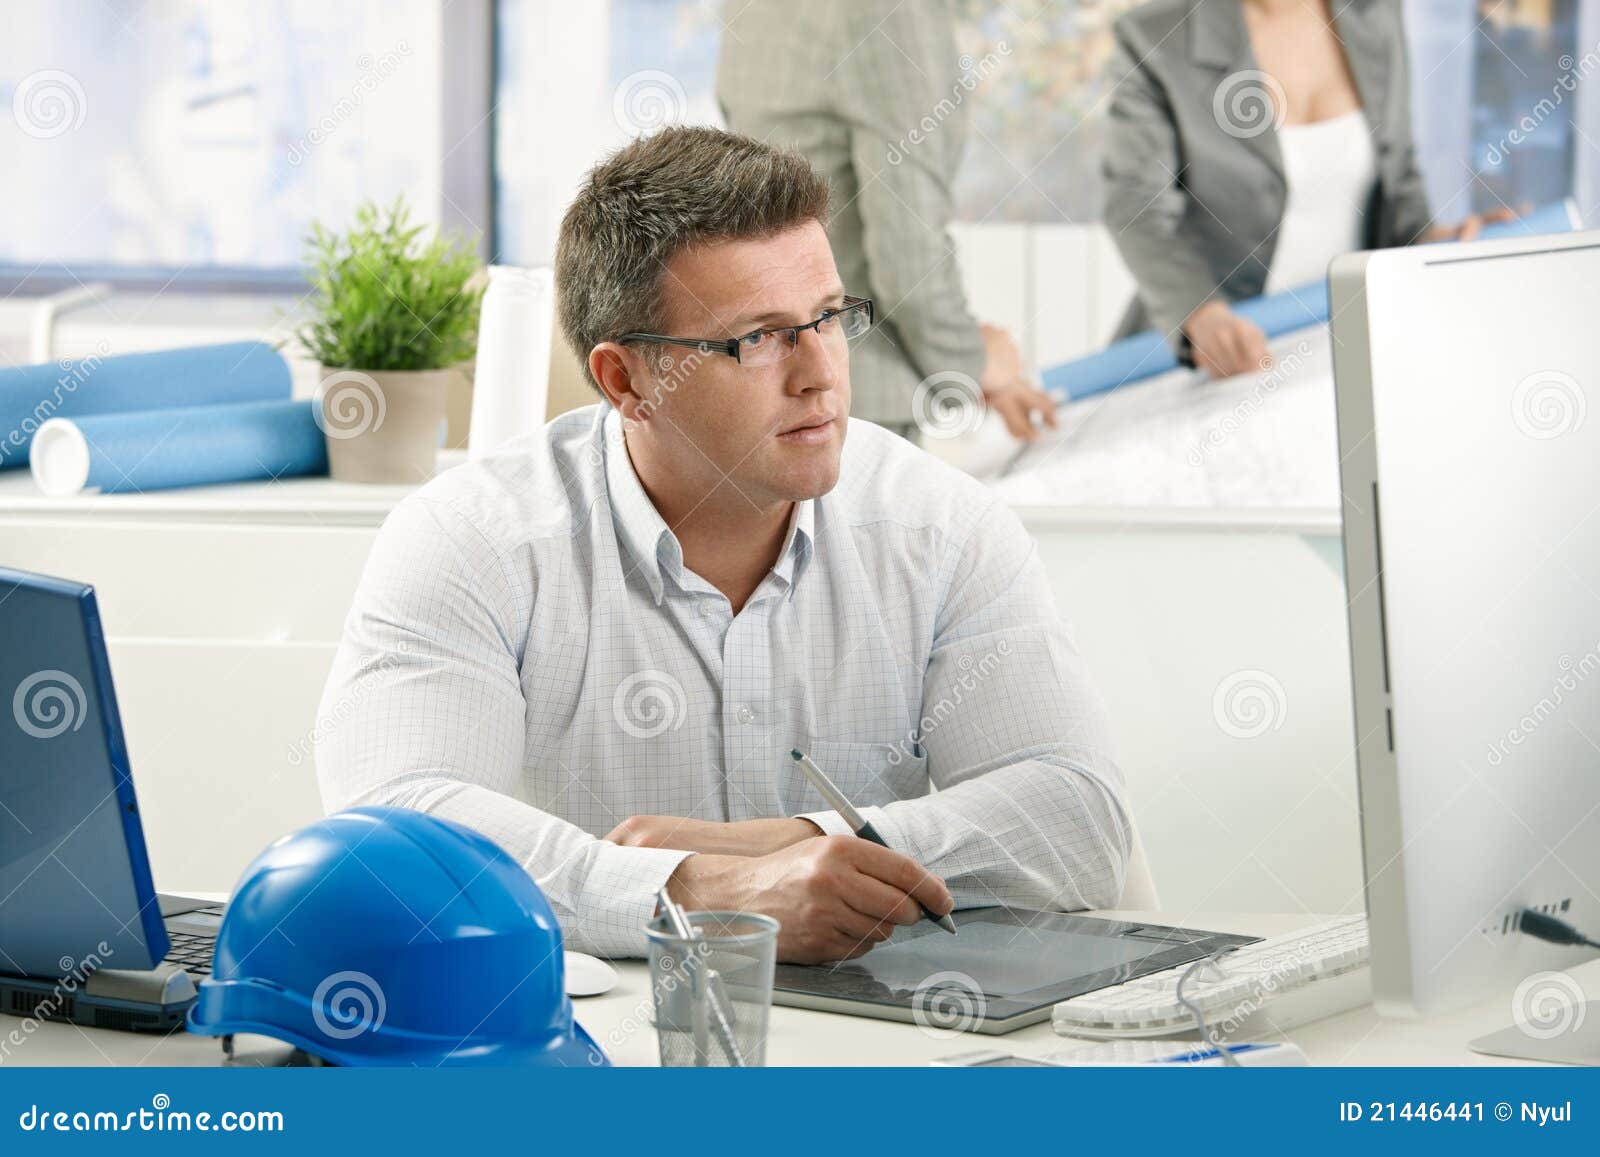 Concentrating Architect At Work Stock Image - Image: 21446441
